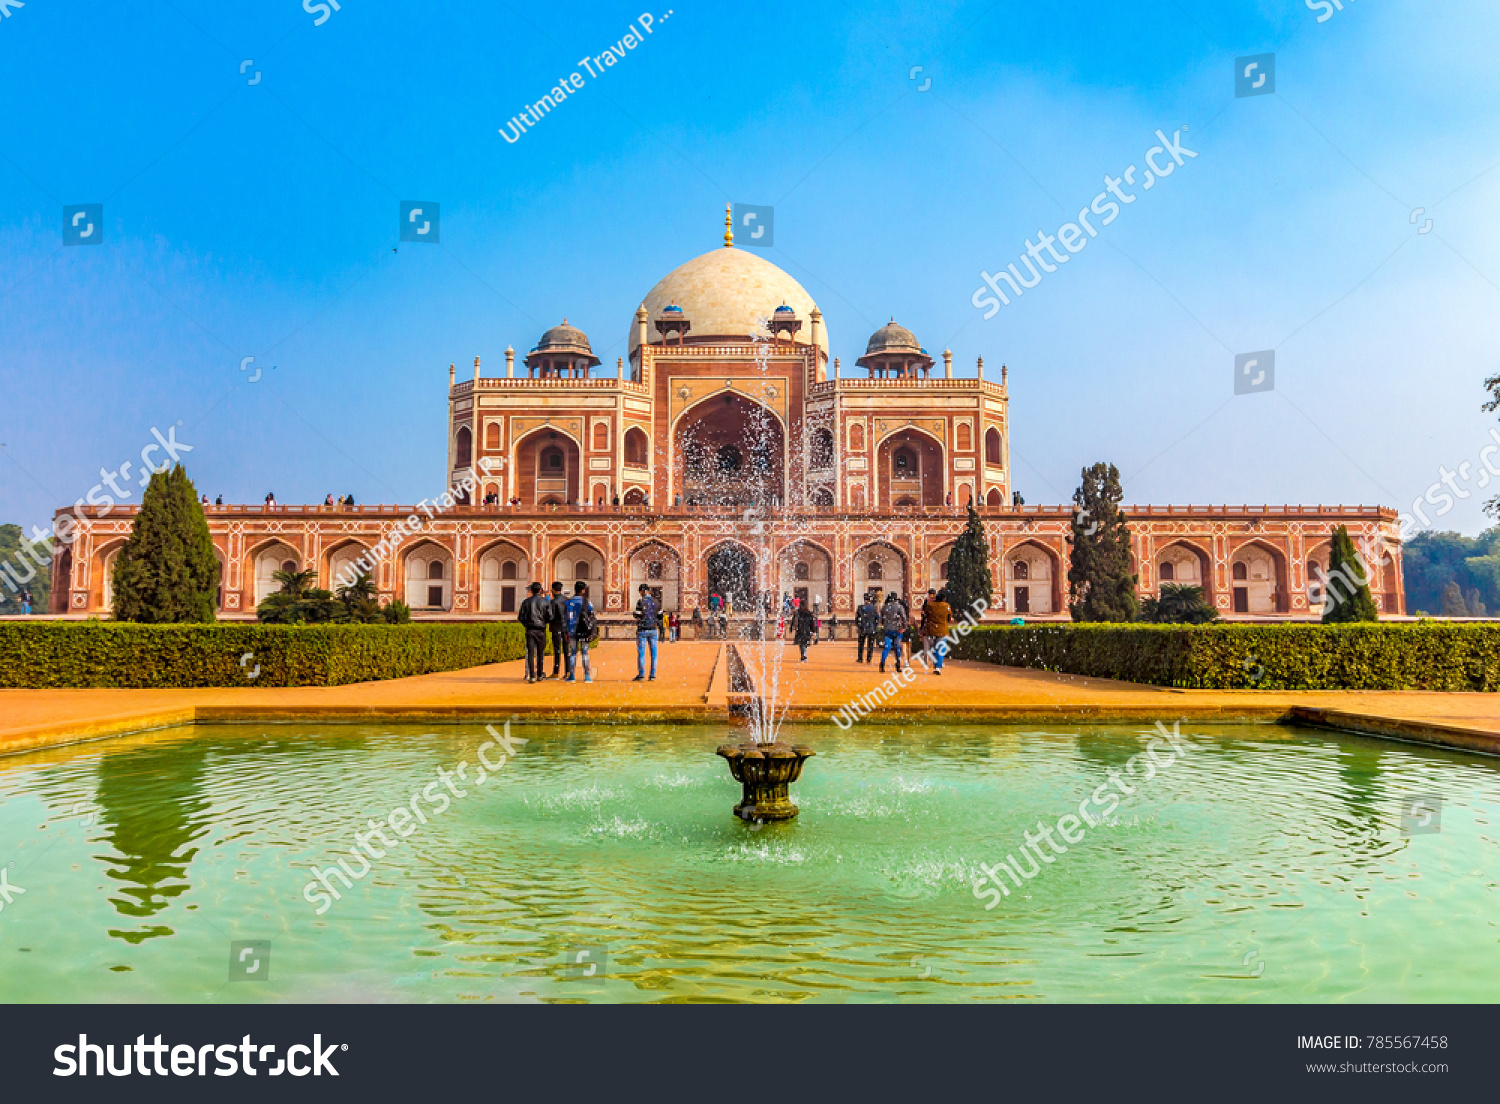 The first garden-tomb on the Indian subcontinent, this is the final resting place of the Mughal Emperor Humayun. The Tomb is an excellent example of Persian architecture. Located in the Delhi, India. #785567458